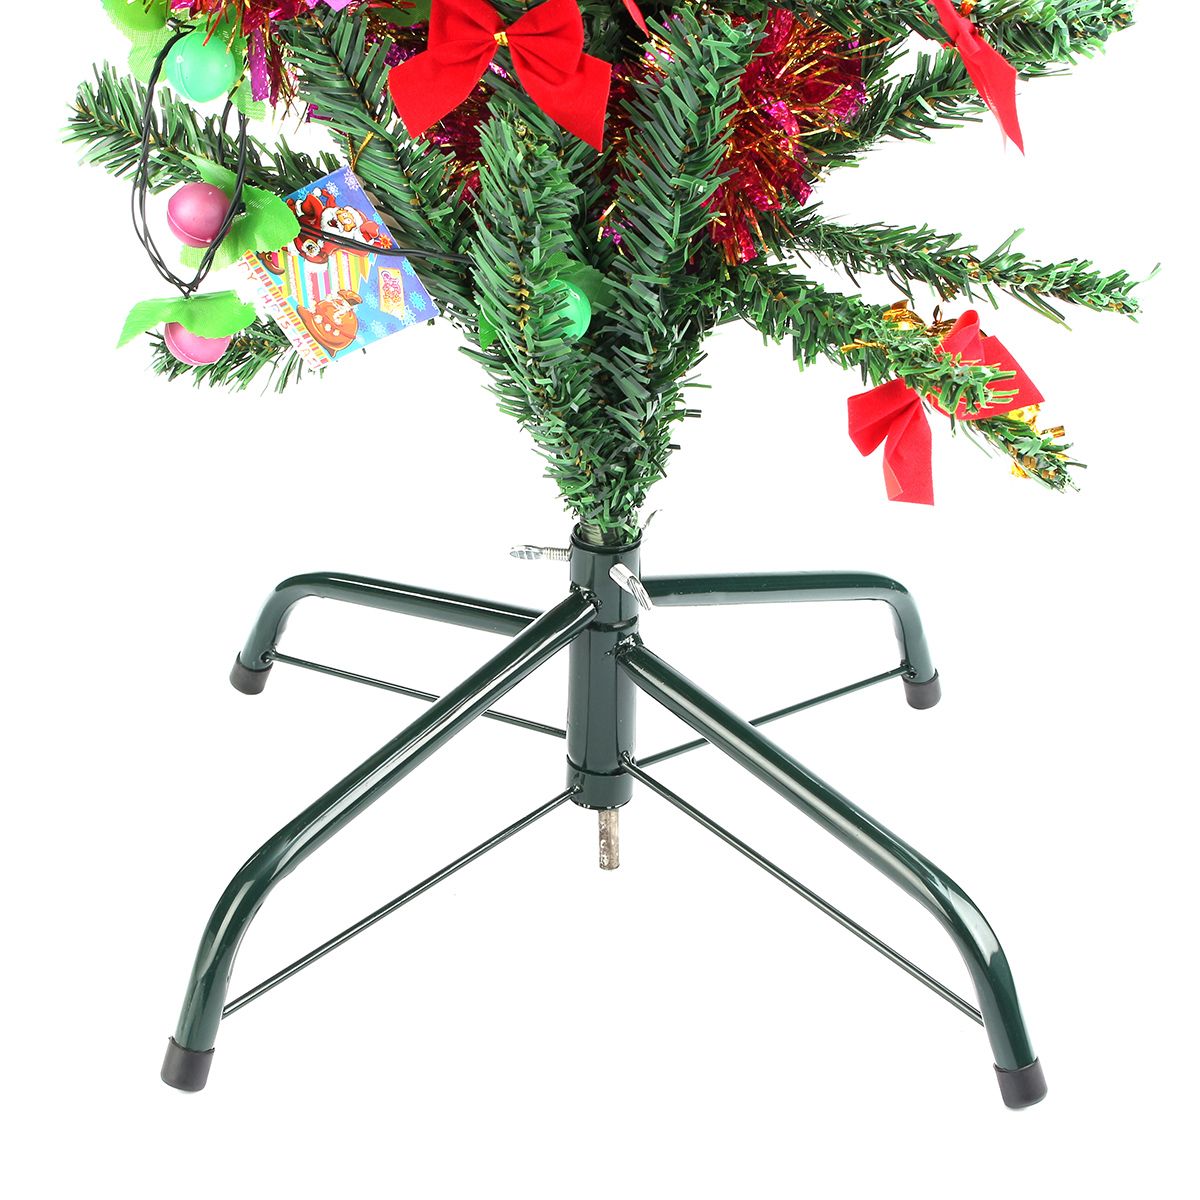 40cm-7ft-Metal-Holder-Base-Christmas-Tree-Stand-Green-Cast-Iron-Stand-Decorations-1364852